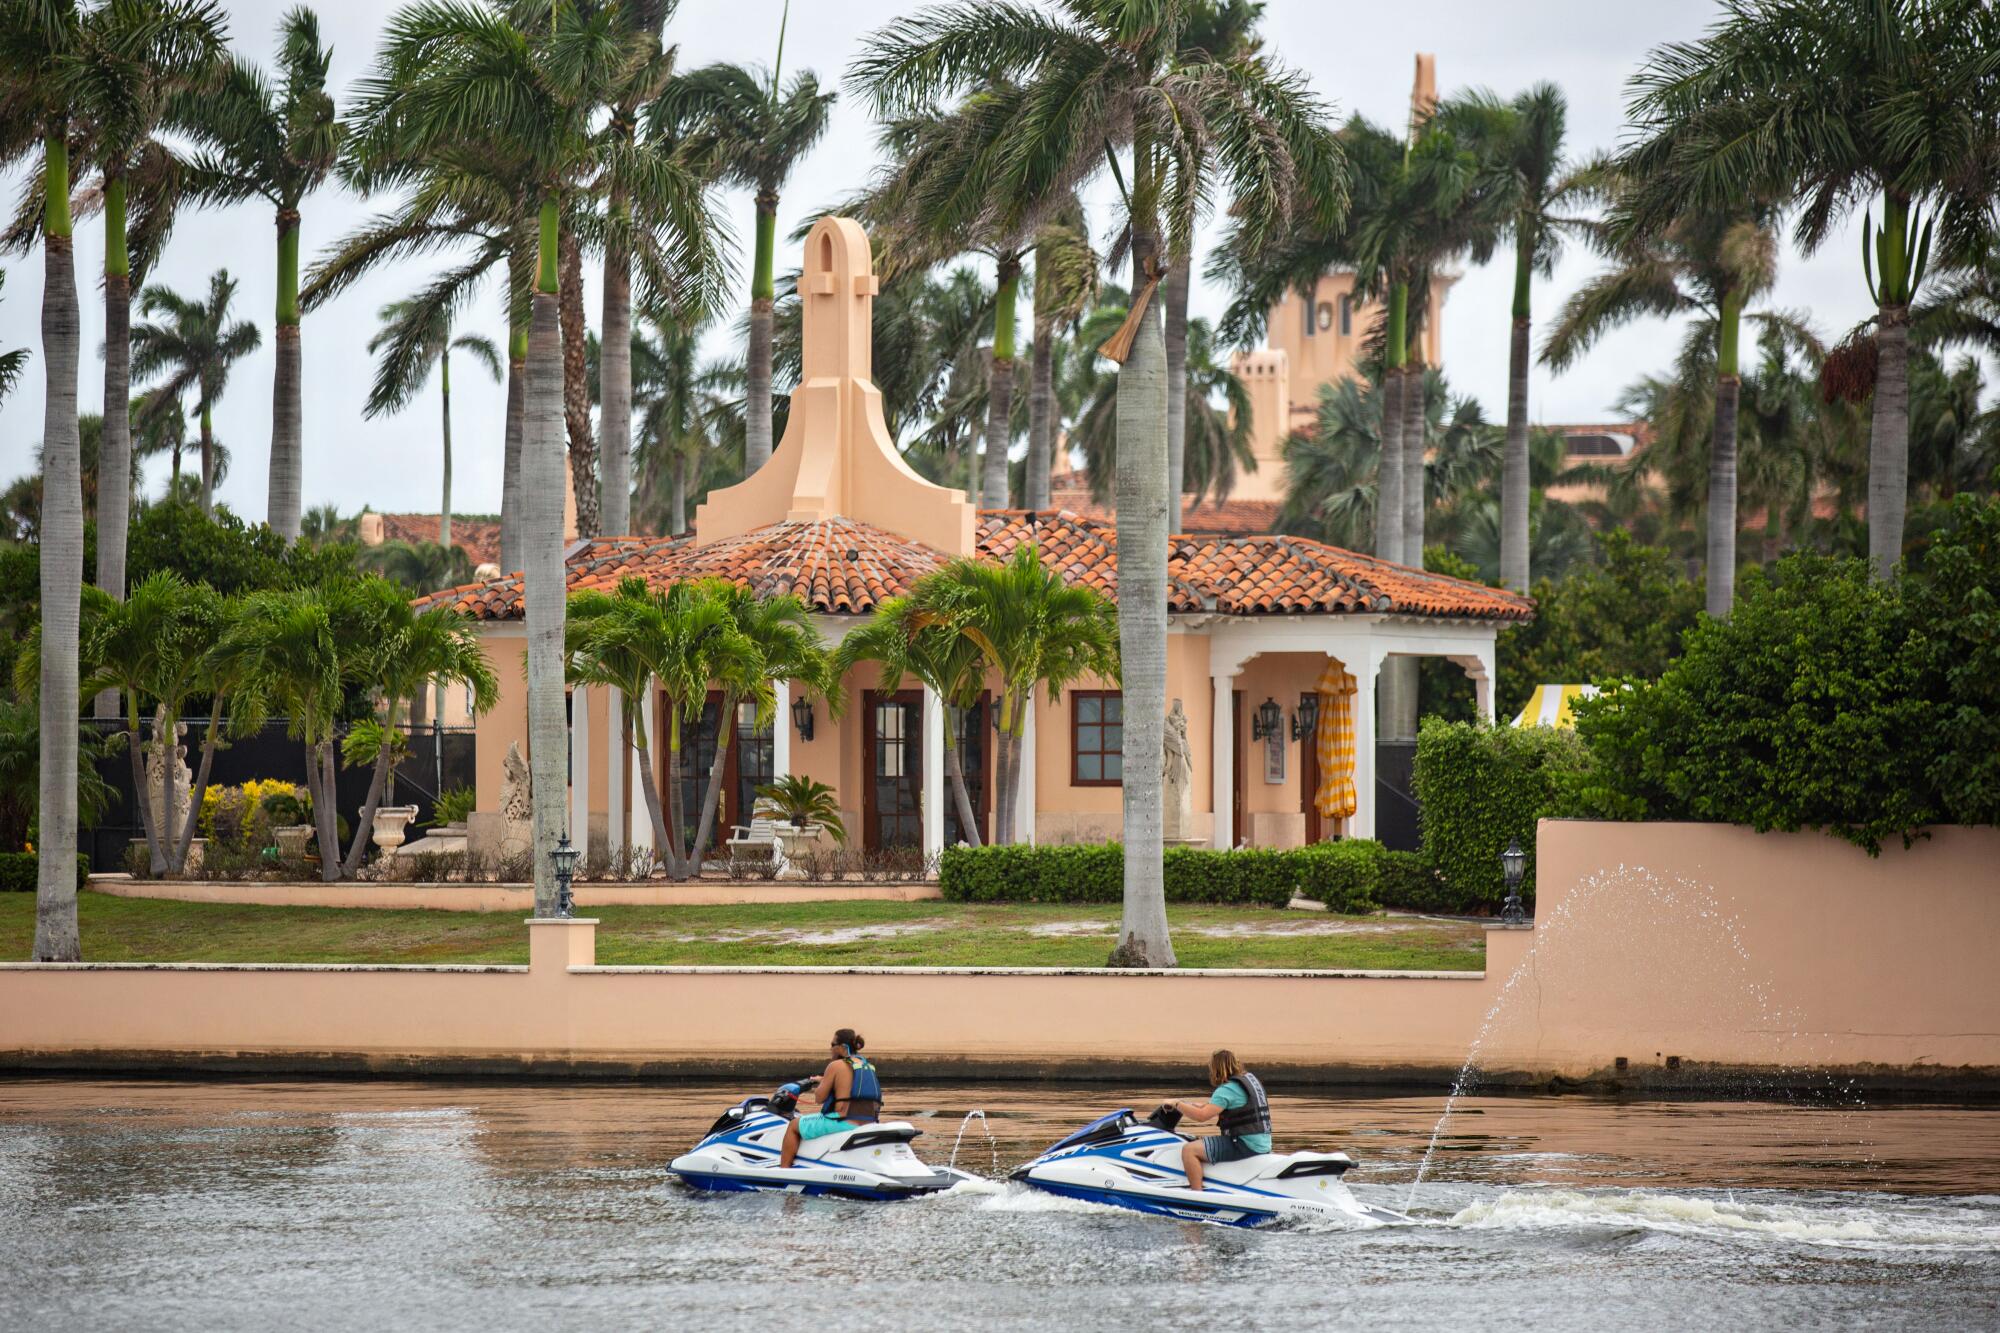 People on Jet Skis pass Mar-a-Lago in Palm Beach.